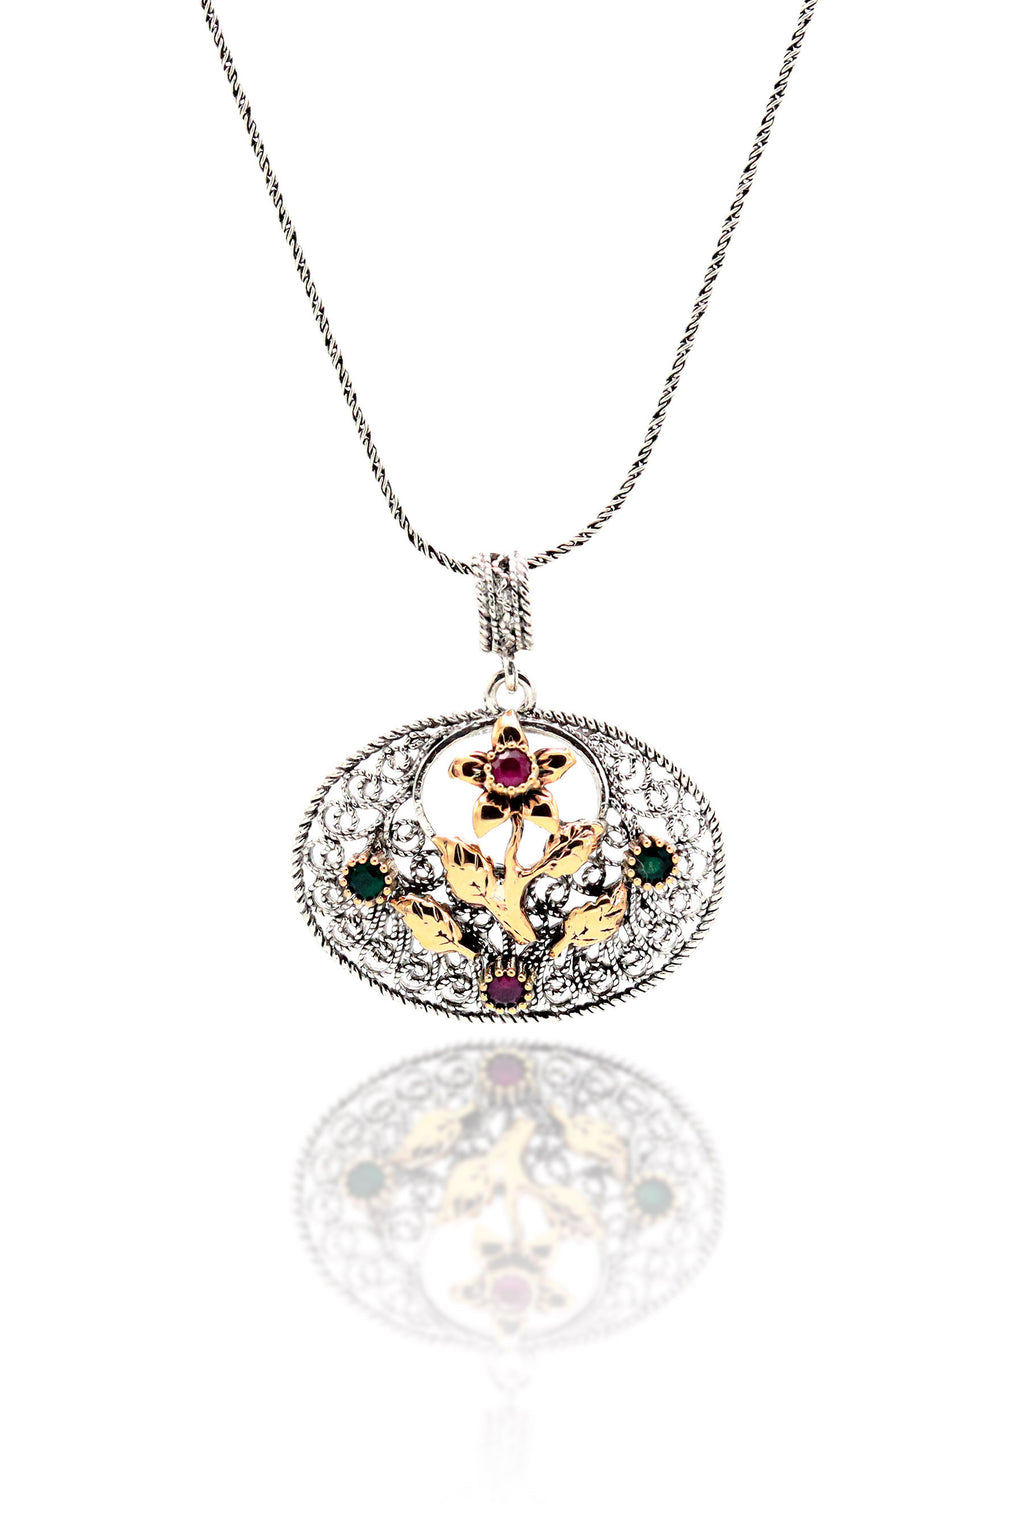 Floral Model Authentic Filigree Silver Necklace (NG201019402)